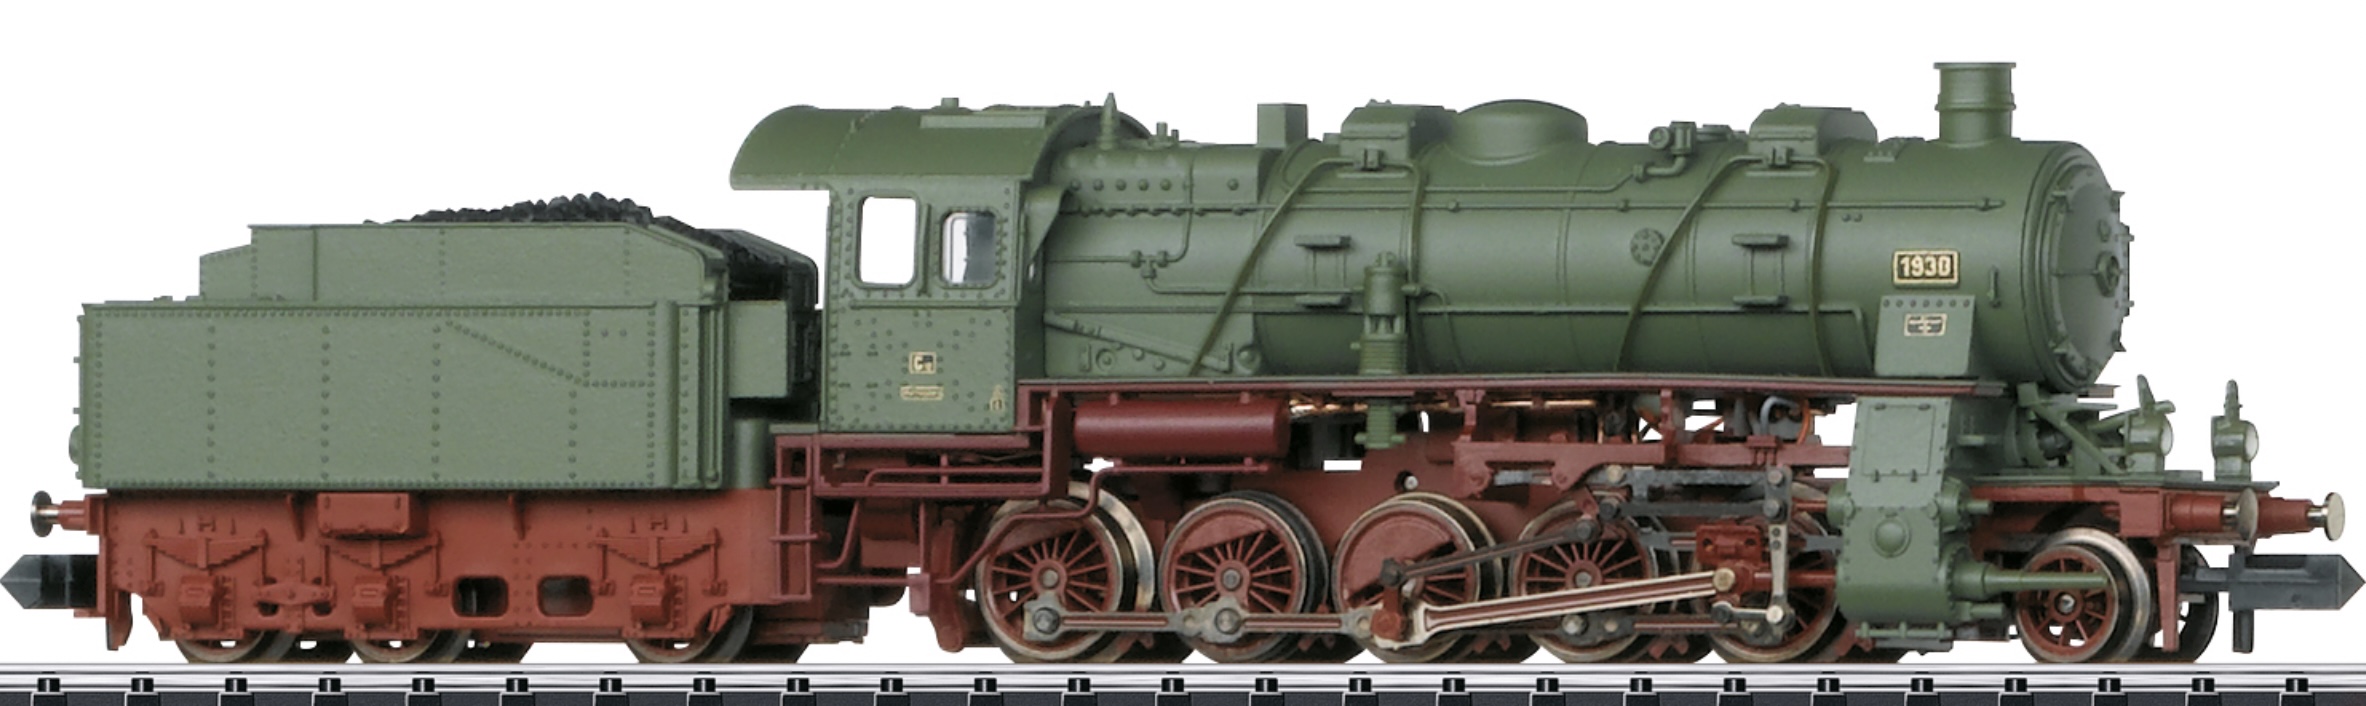 N Scale - Minitrix - 16585 - Locomotive, Steam, 2-10-0 Class 58 - Painted/Lettered - 1930